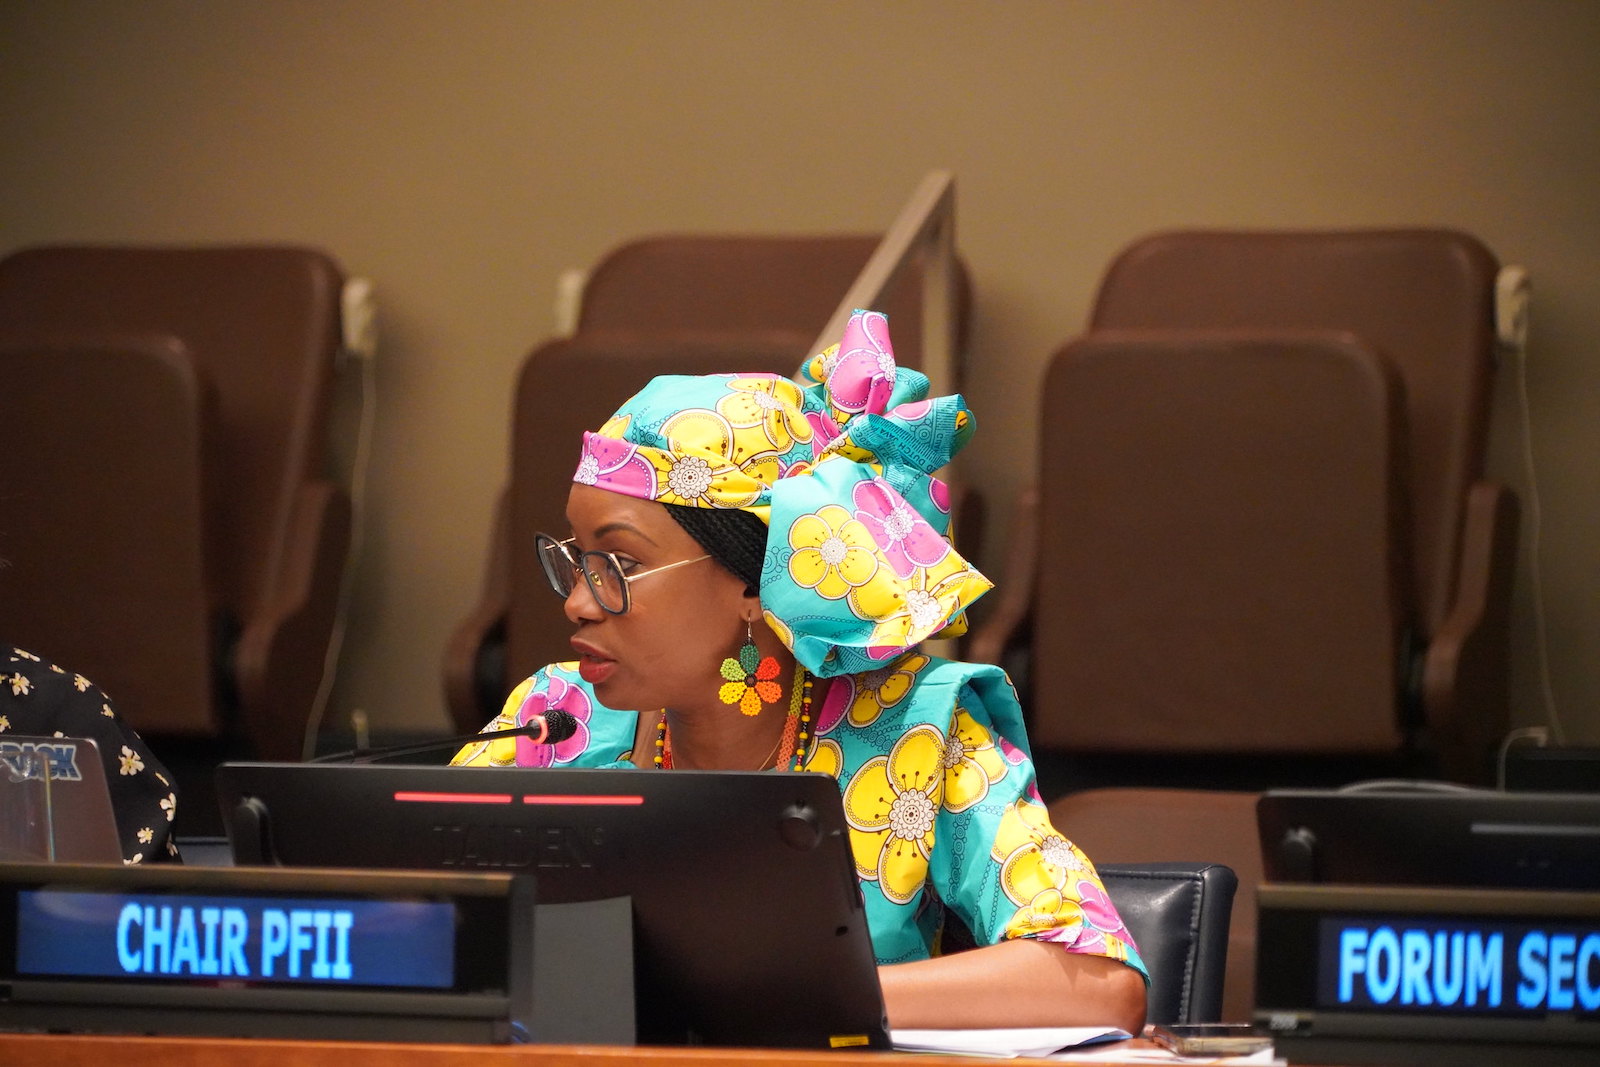 A woman wears a matching floral shirt and sheet headdress and sits at a desk with a label that says Chair PFII